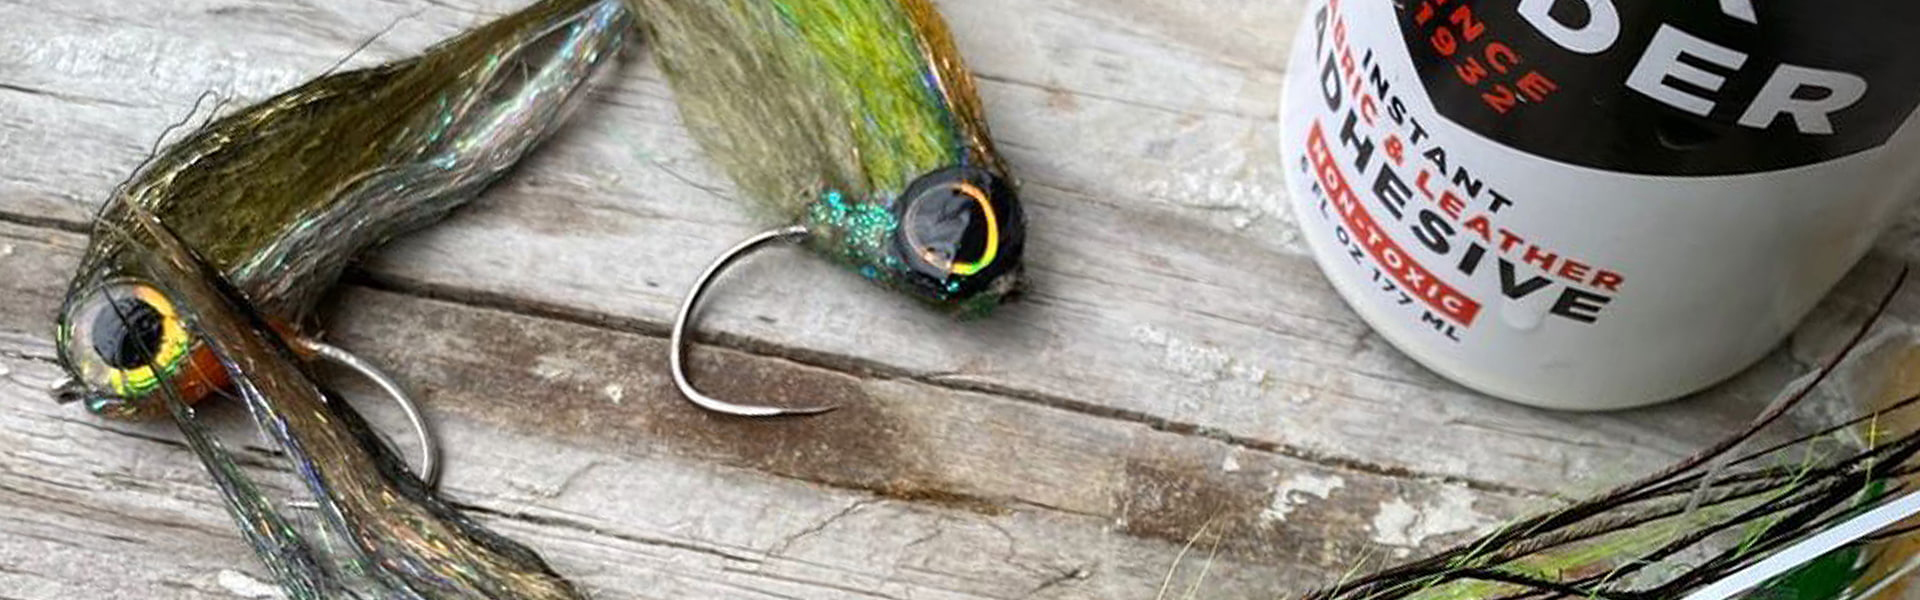 Tying Fly Fishing Flies With Tear Mender